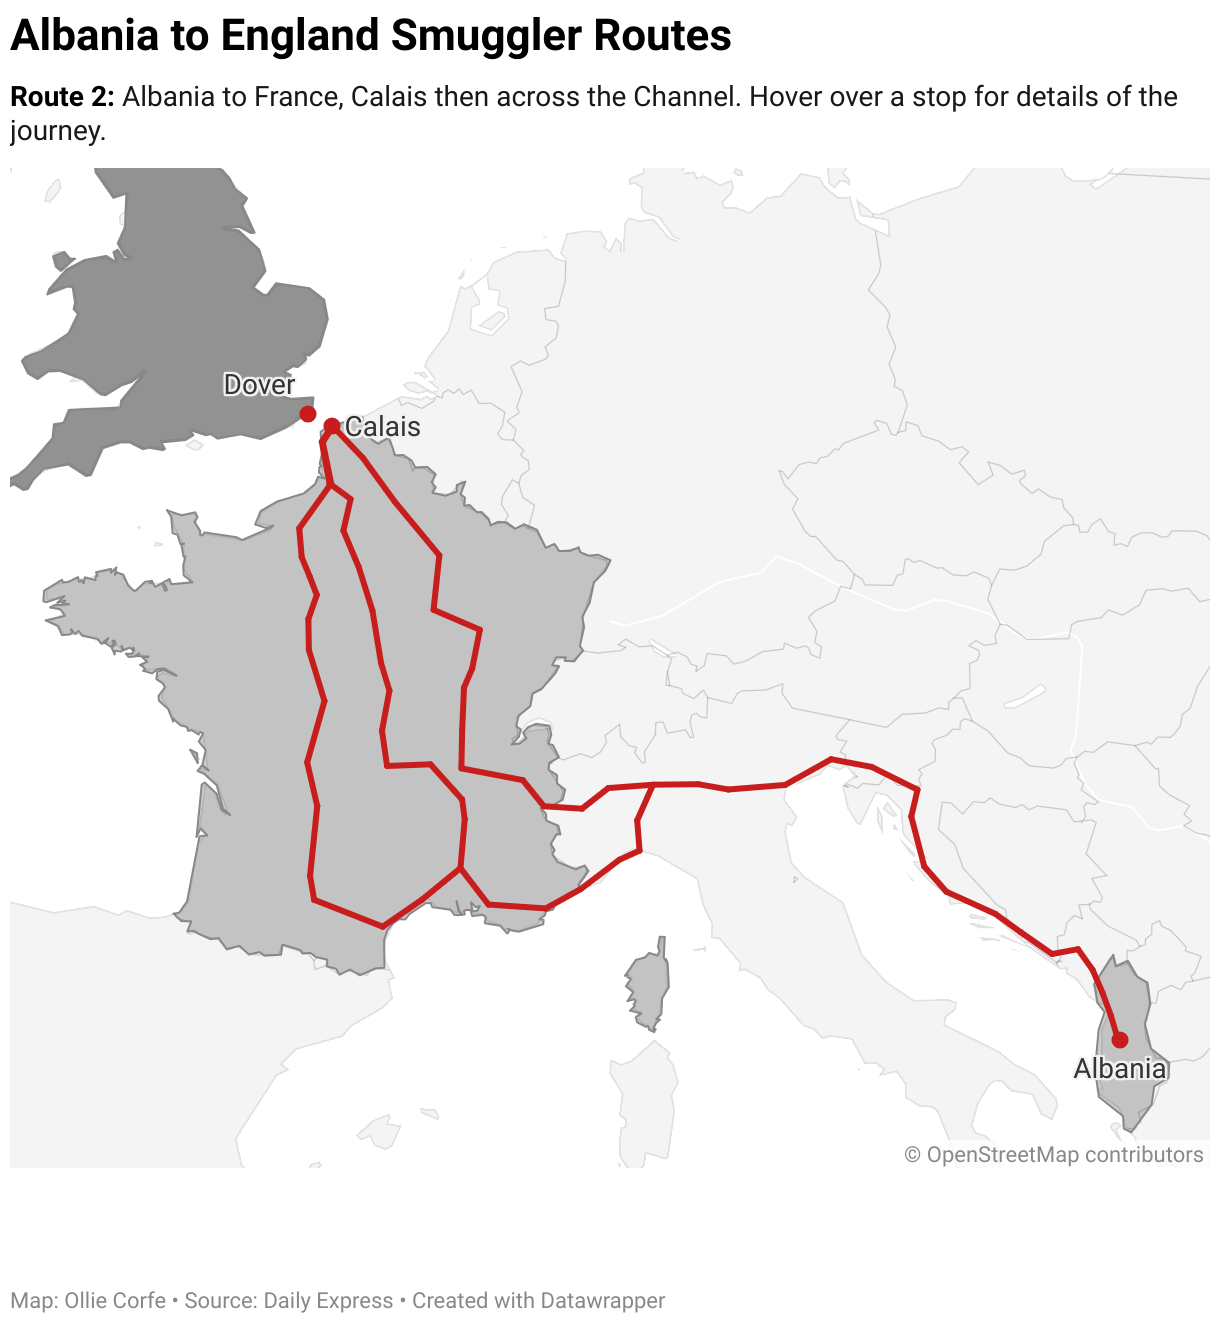 Map of the Albania to England smuggler route.